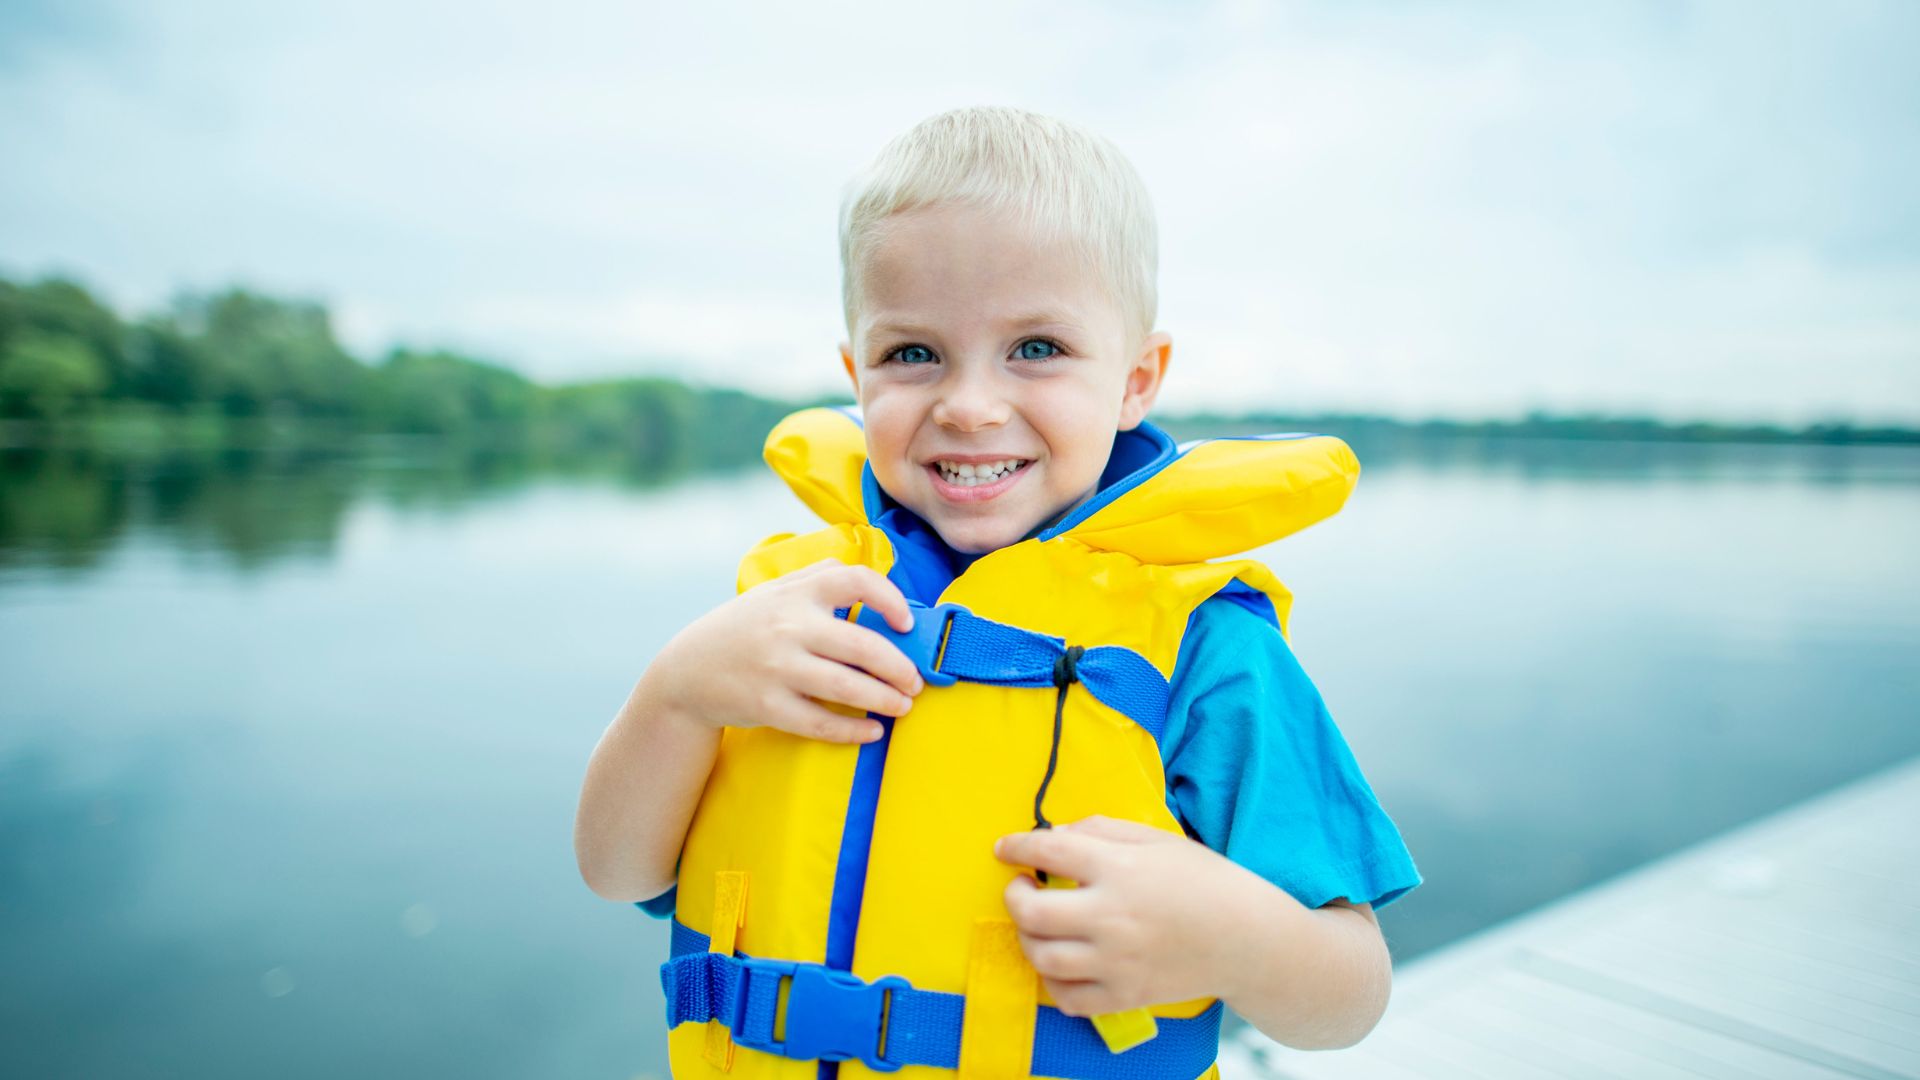 Little boy in personal floatation device by the lake. Summer safety tips for kids from Propel Physiotherapy.